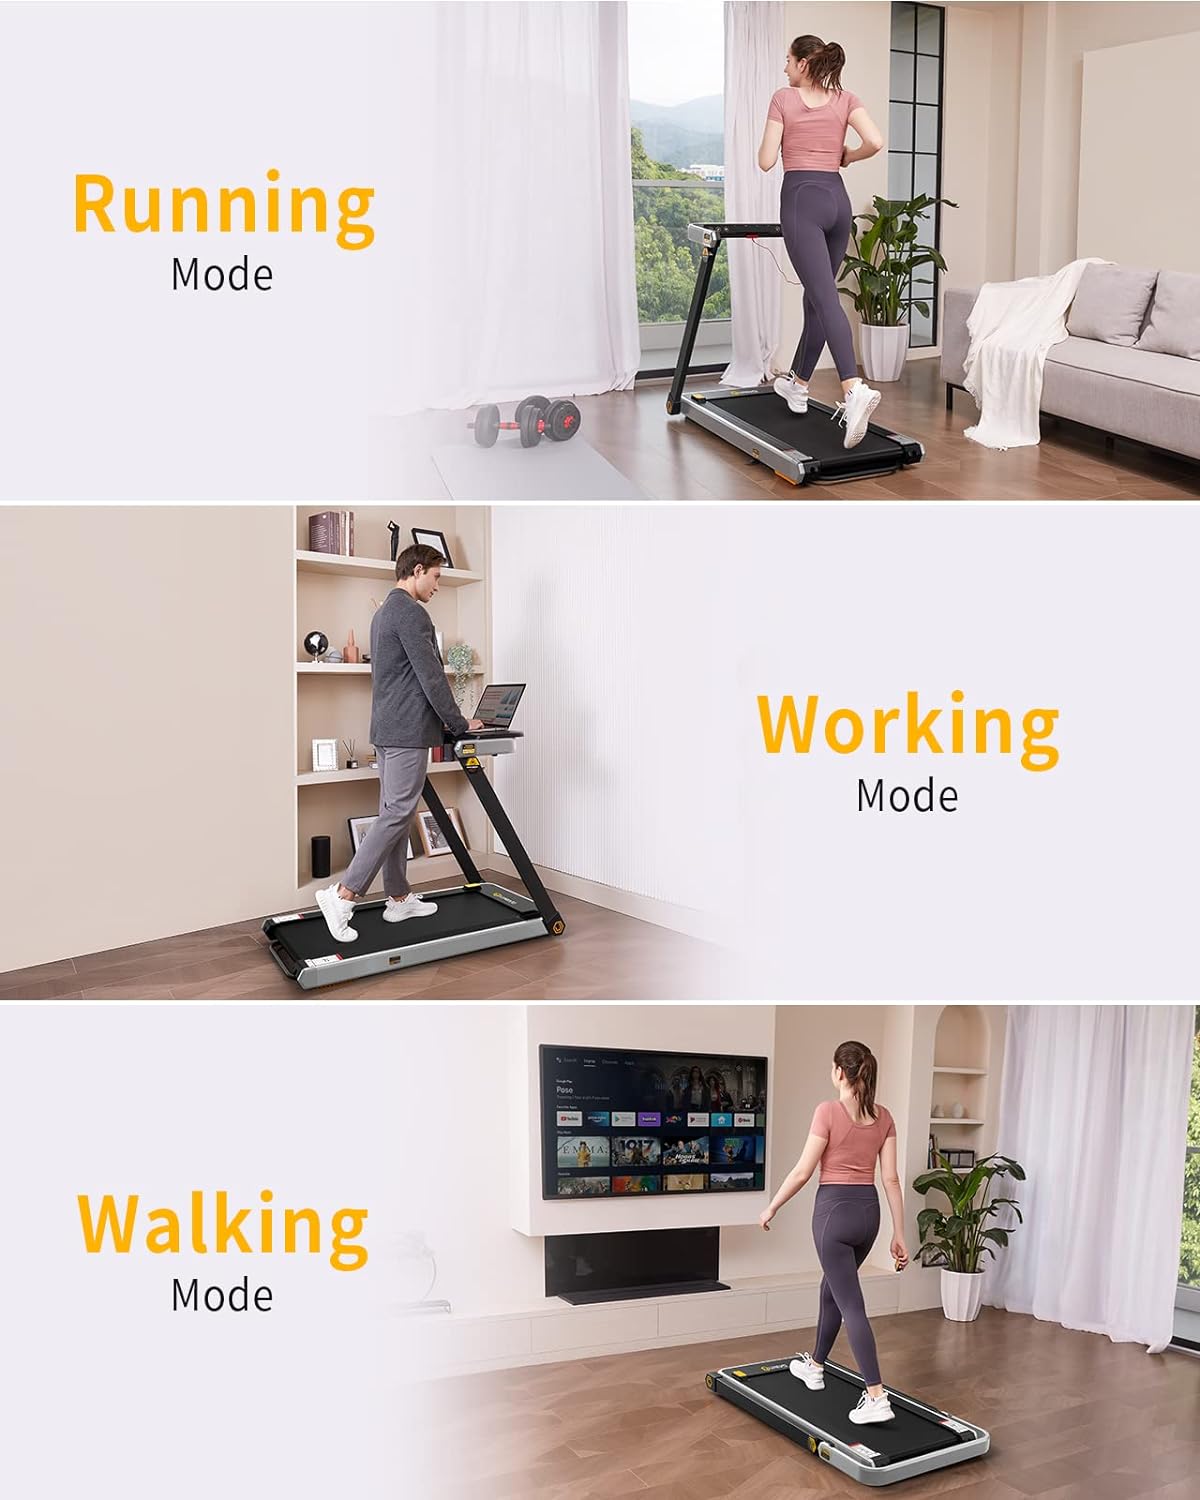 UREVO Treadmill with Desk, 3 in 1 Foldable Treadmill with Removable Desk, Install Free Under Desk Treadmill, 3HP Powerful Walking Treadmill for Office with Remote, Folding Treadmill in 2s Folding